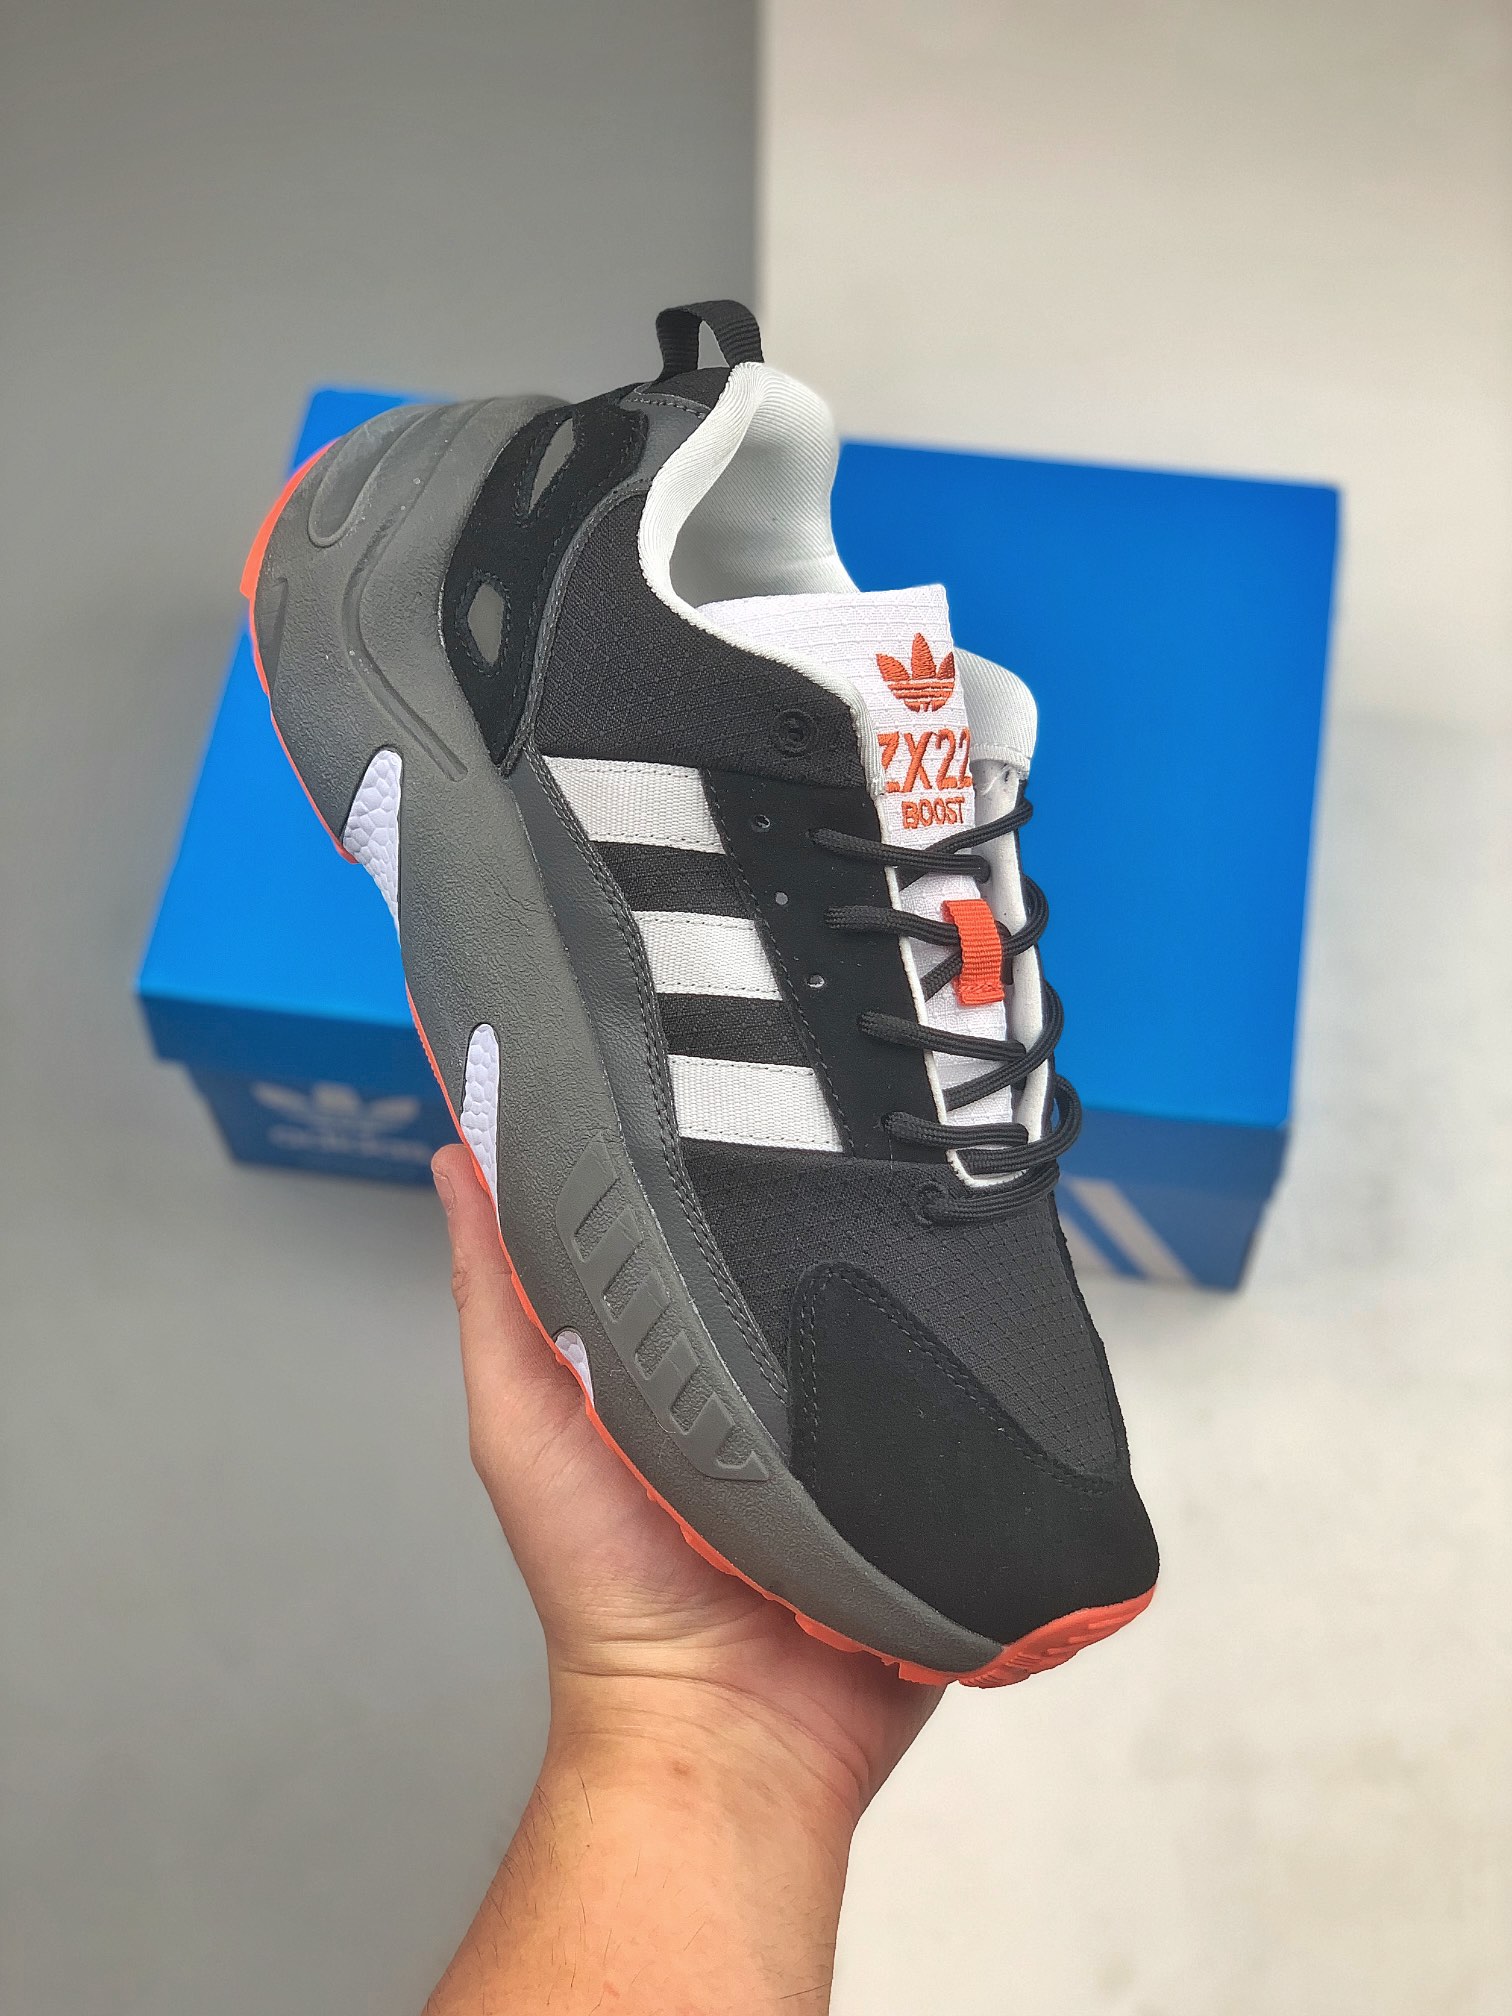 Adidas ZX 22 Boost Black Grey GX8662 - Stylish and Comfy Sneakers